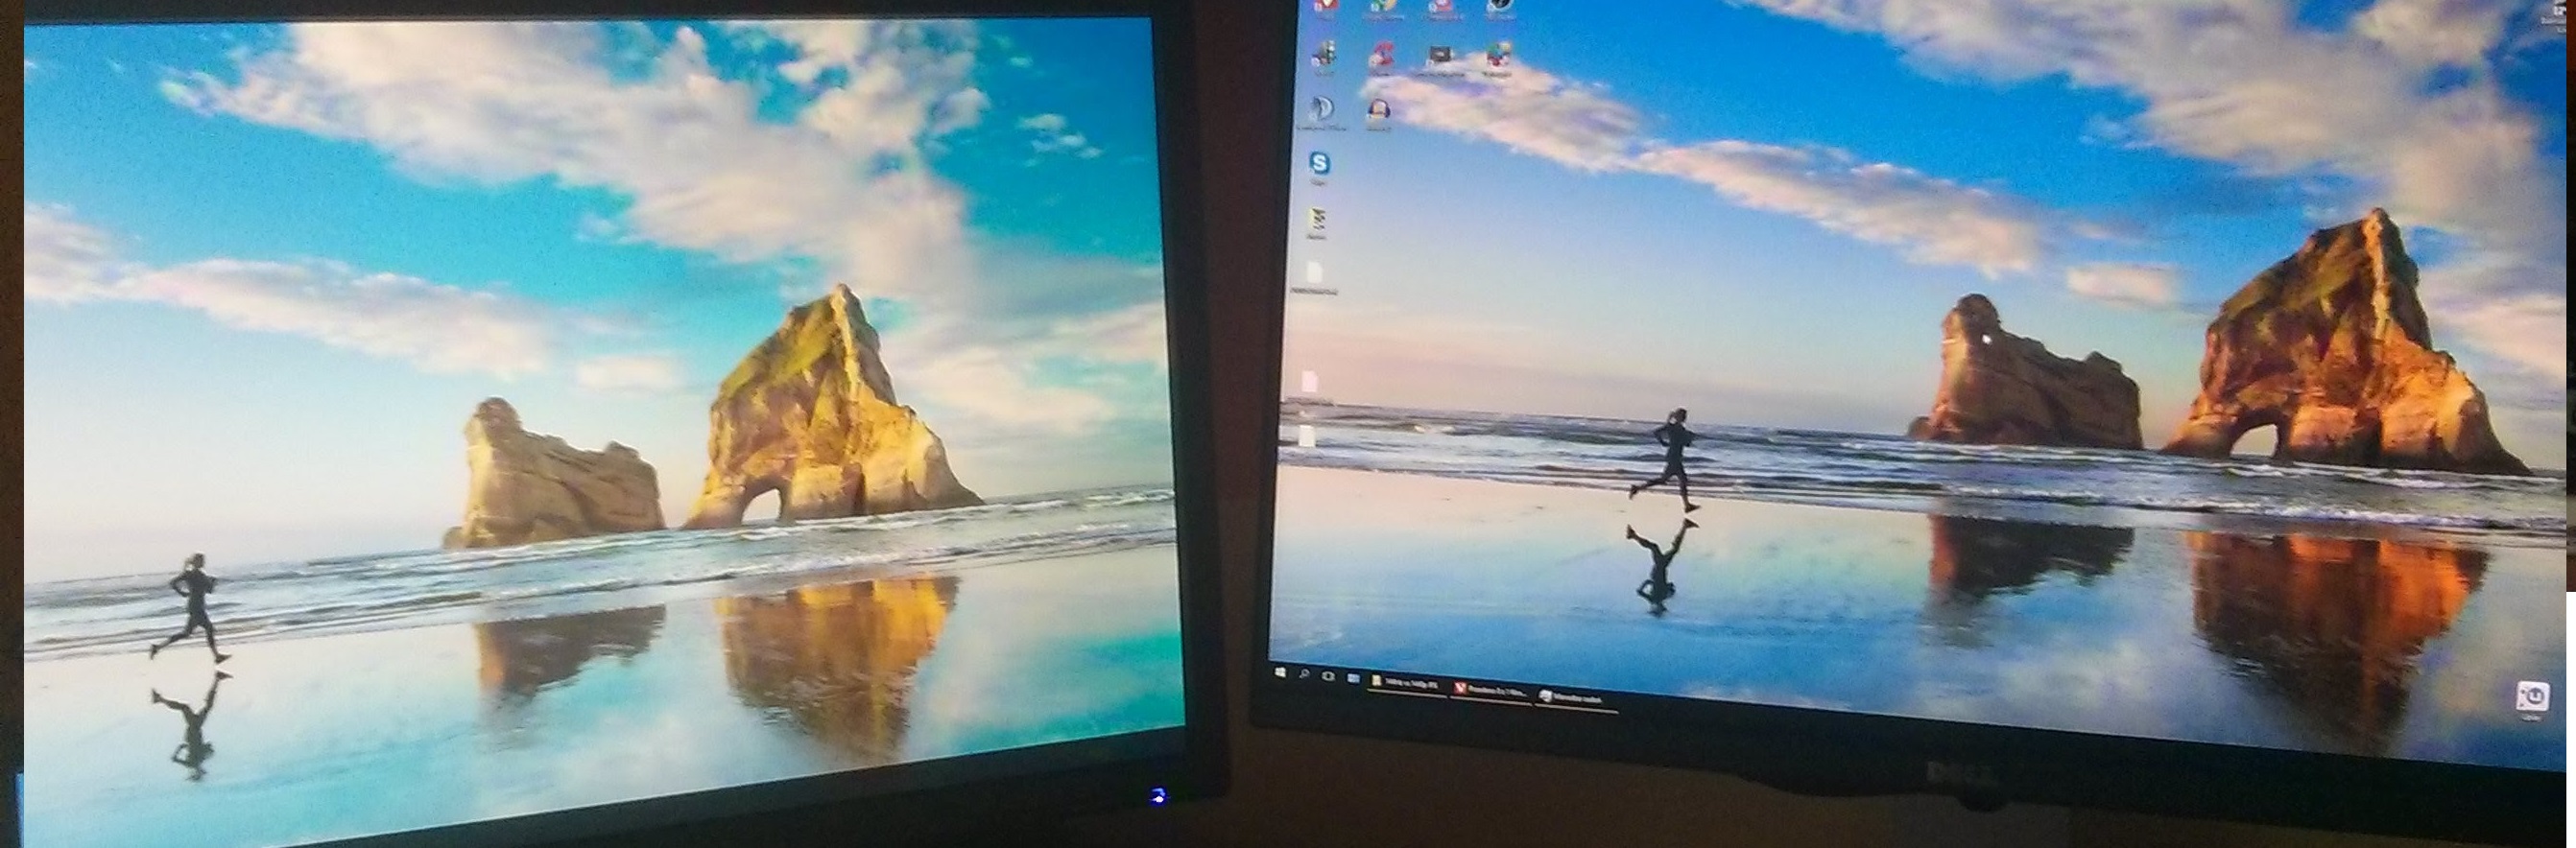 krise Match Arrangement IPS vs. TN Displays - What's the difference? - Pojo.com